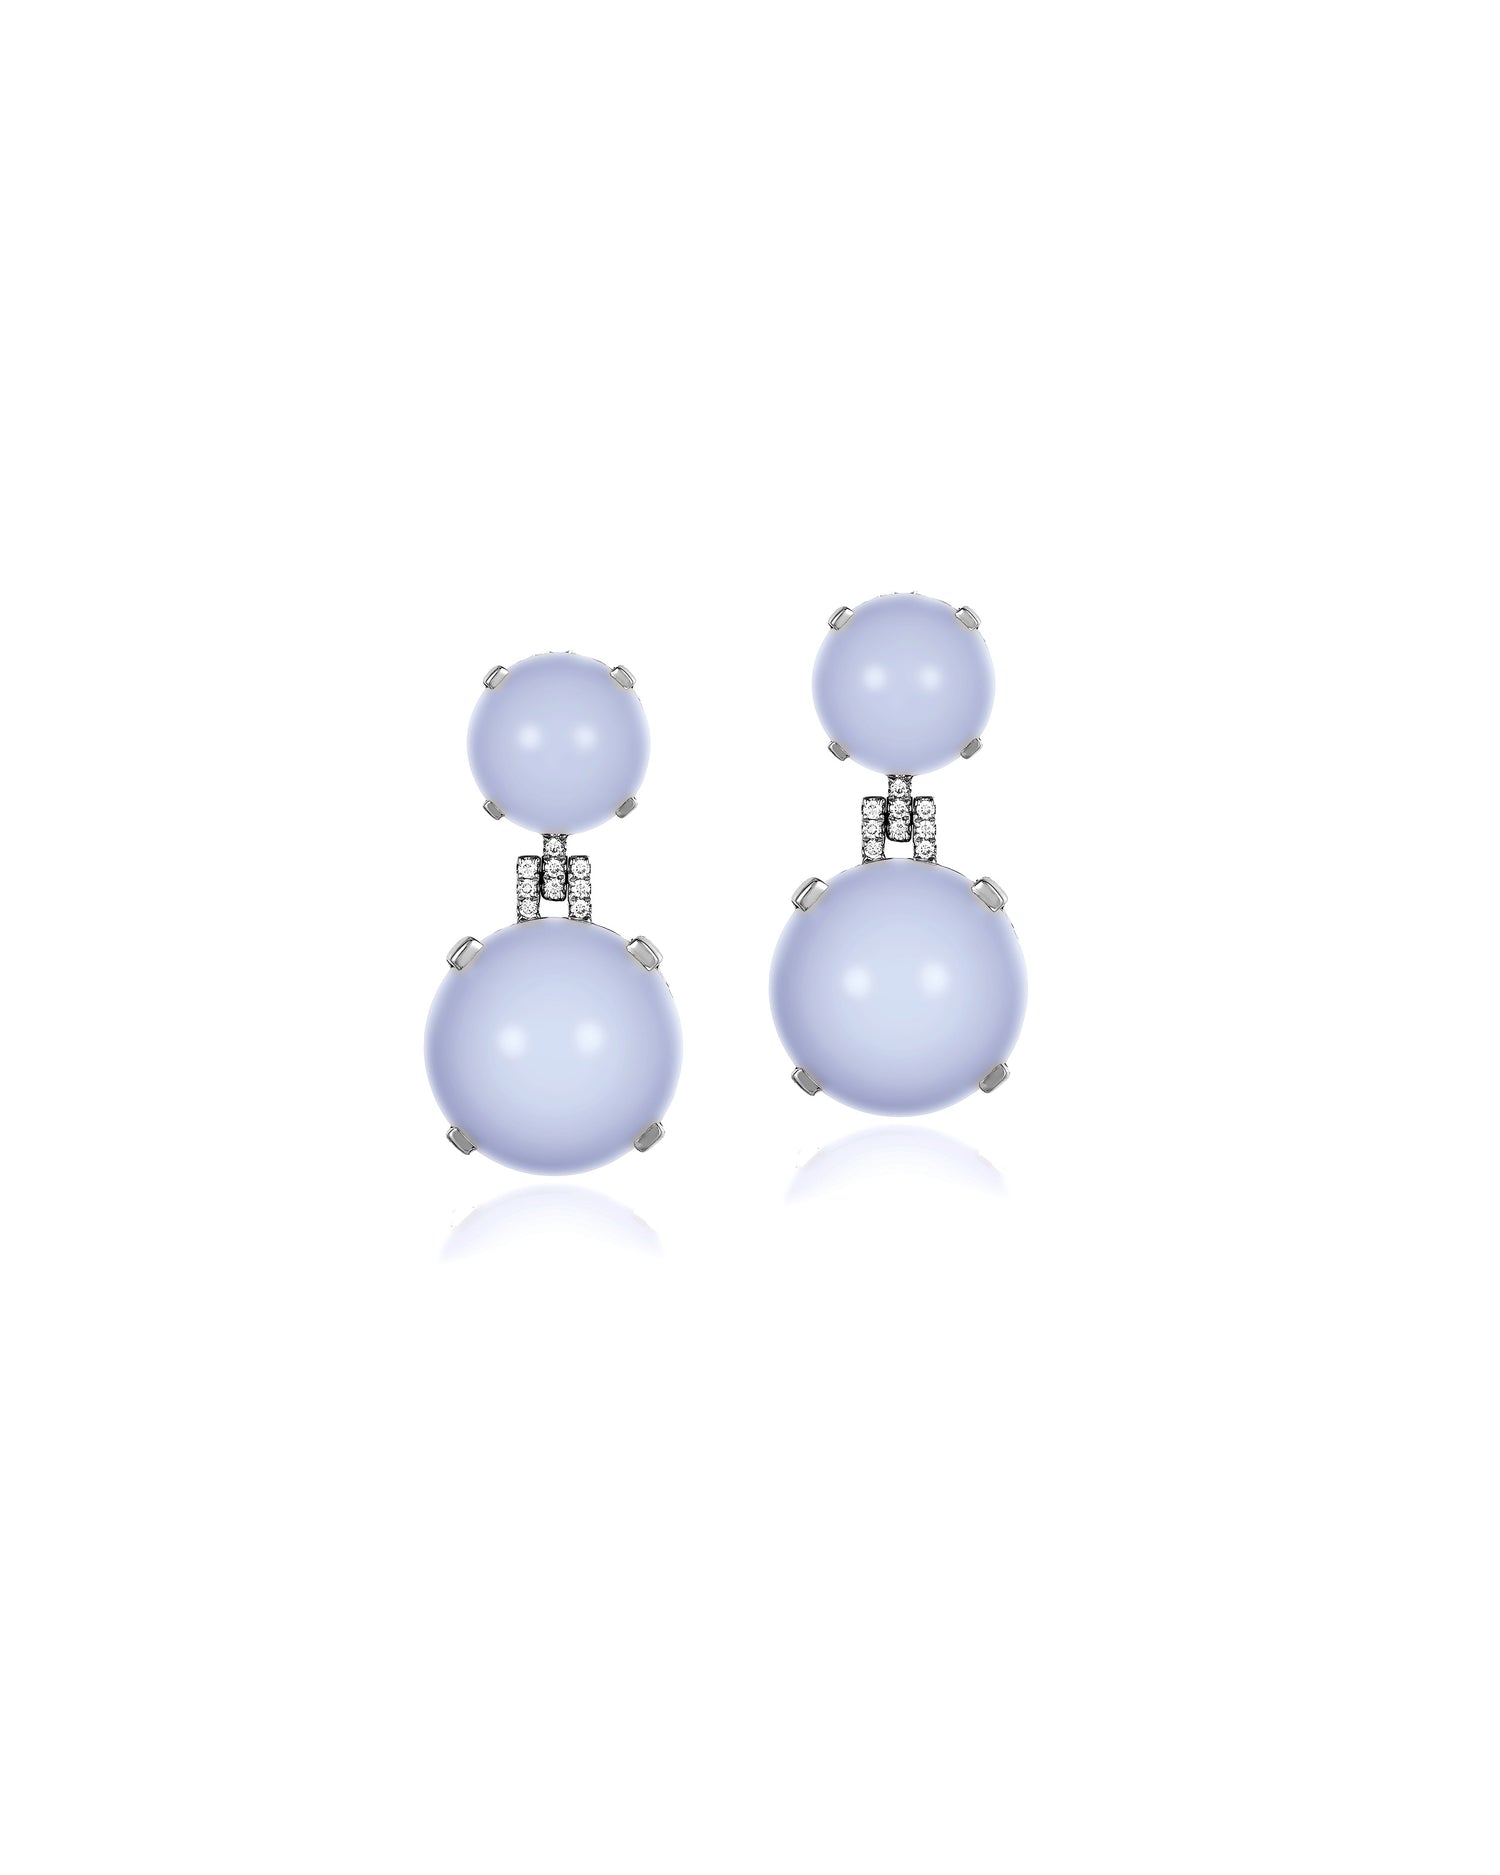 Blue chalcedony cabochon earrings with a lavender hue and diamond embellishments on 18K white gold